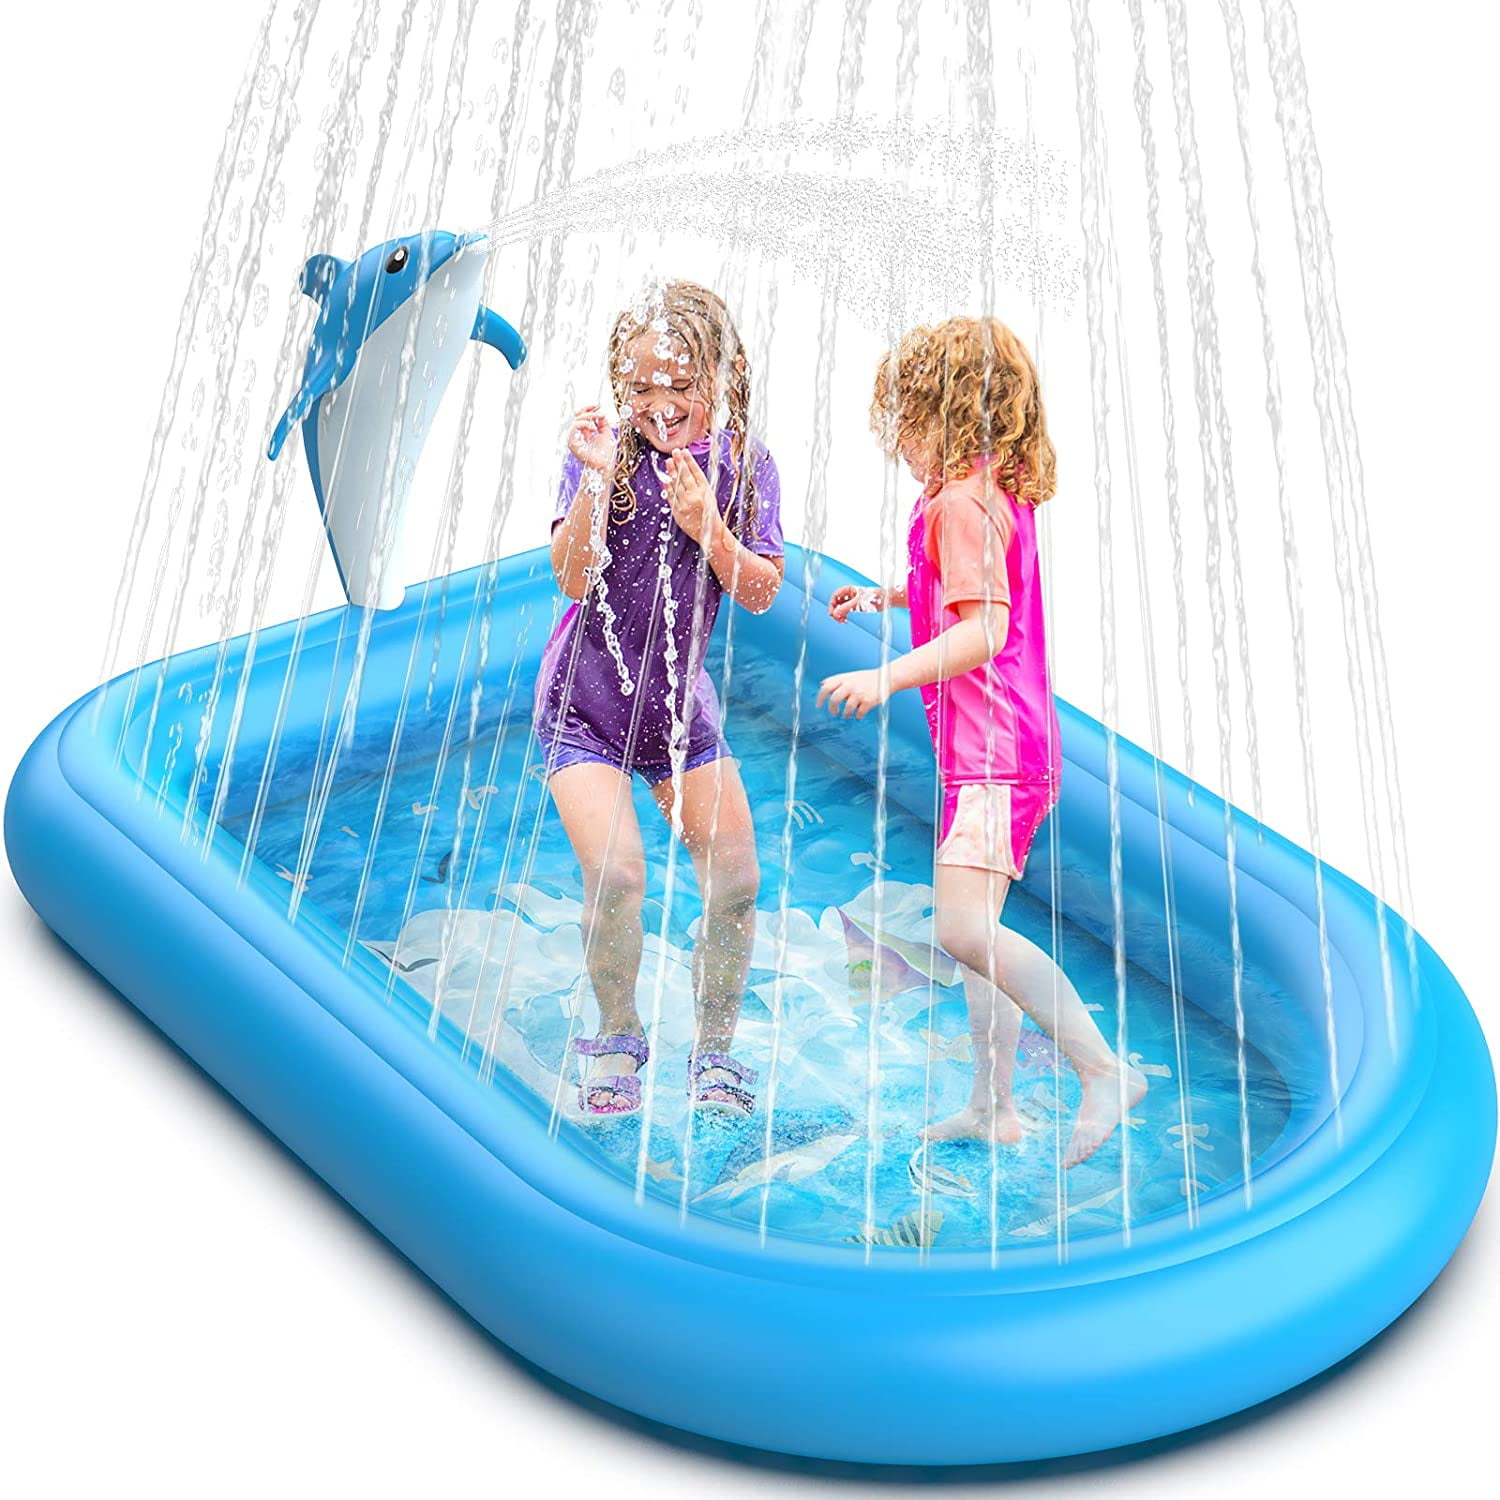 Details about   Inflatable Sprinkler Pool for Kids Baby Toddler Wading Pool,Unicorn... 